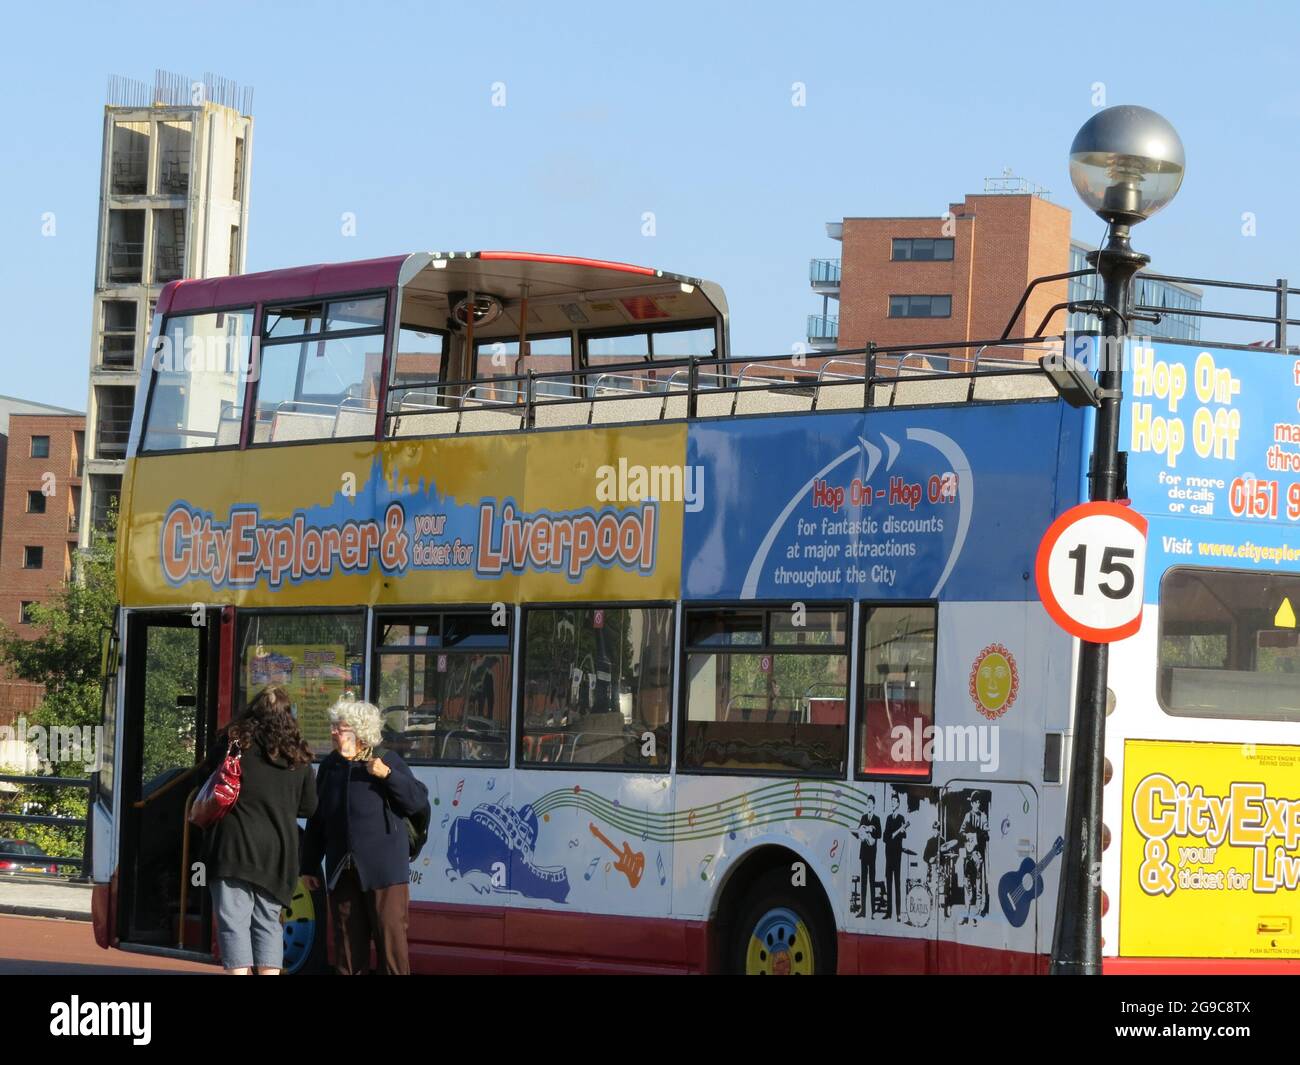 LIVERPOOL, UNITED KINGDOM - Sep 22, 2014: A Liverpool tour bus by the royal Albert docks in Liverpool Stock Photo